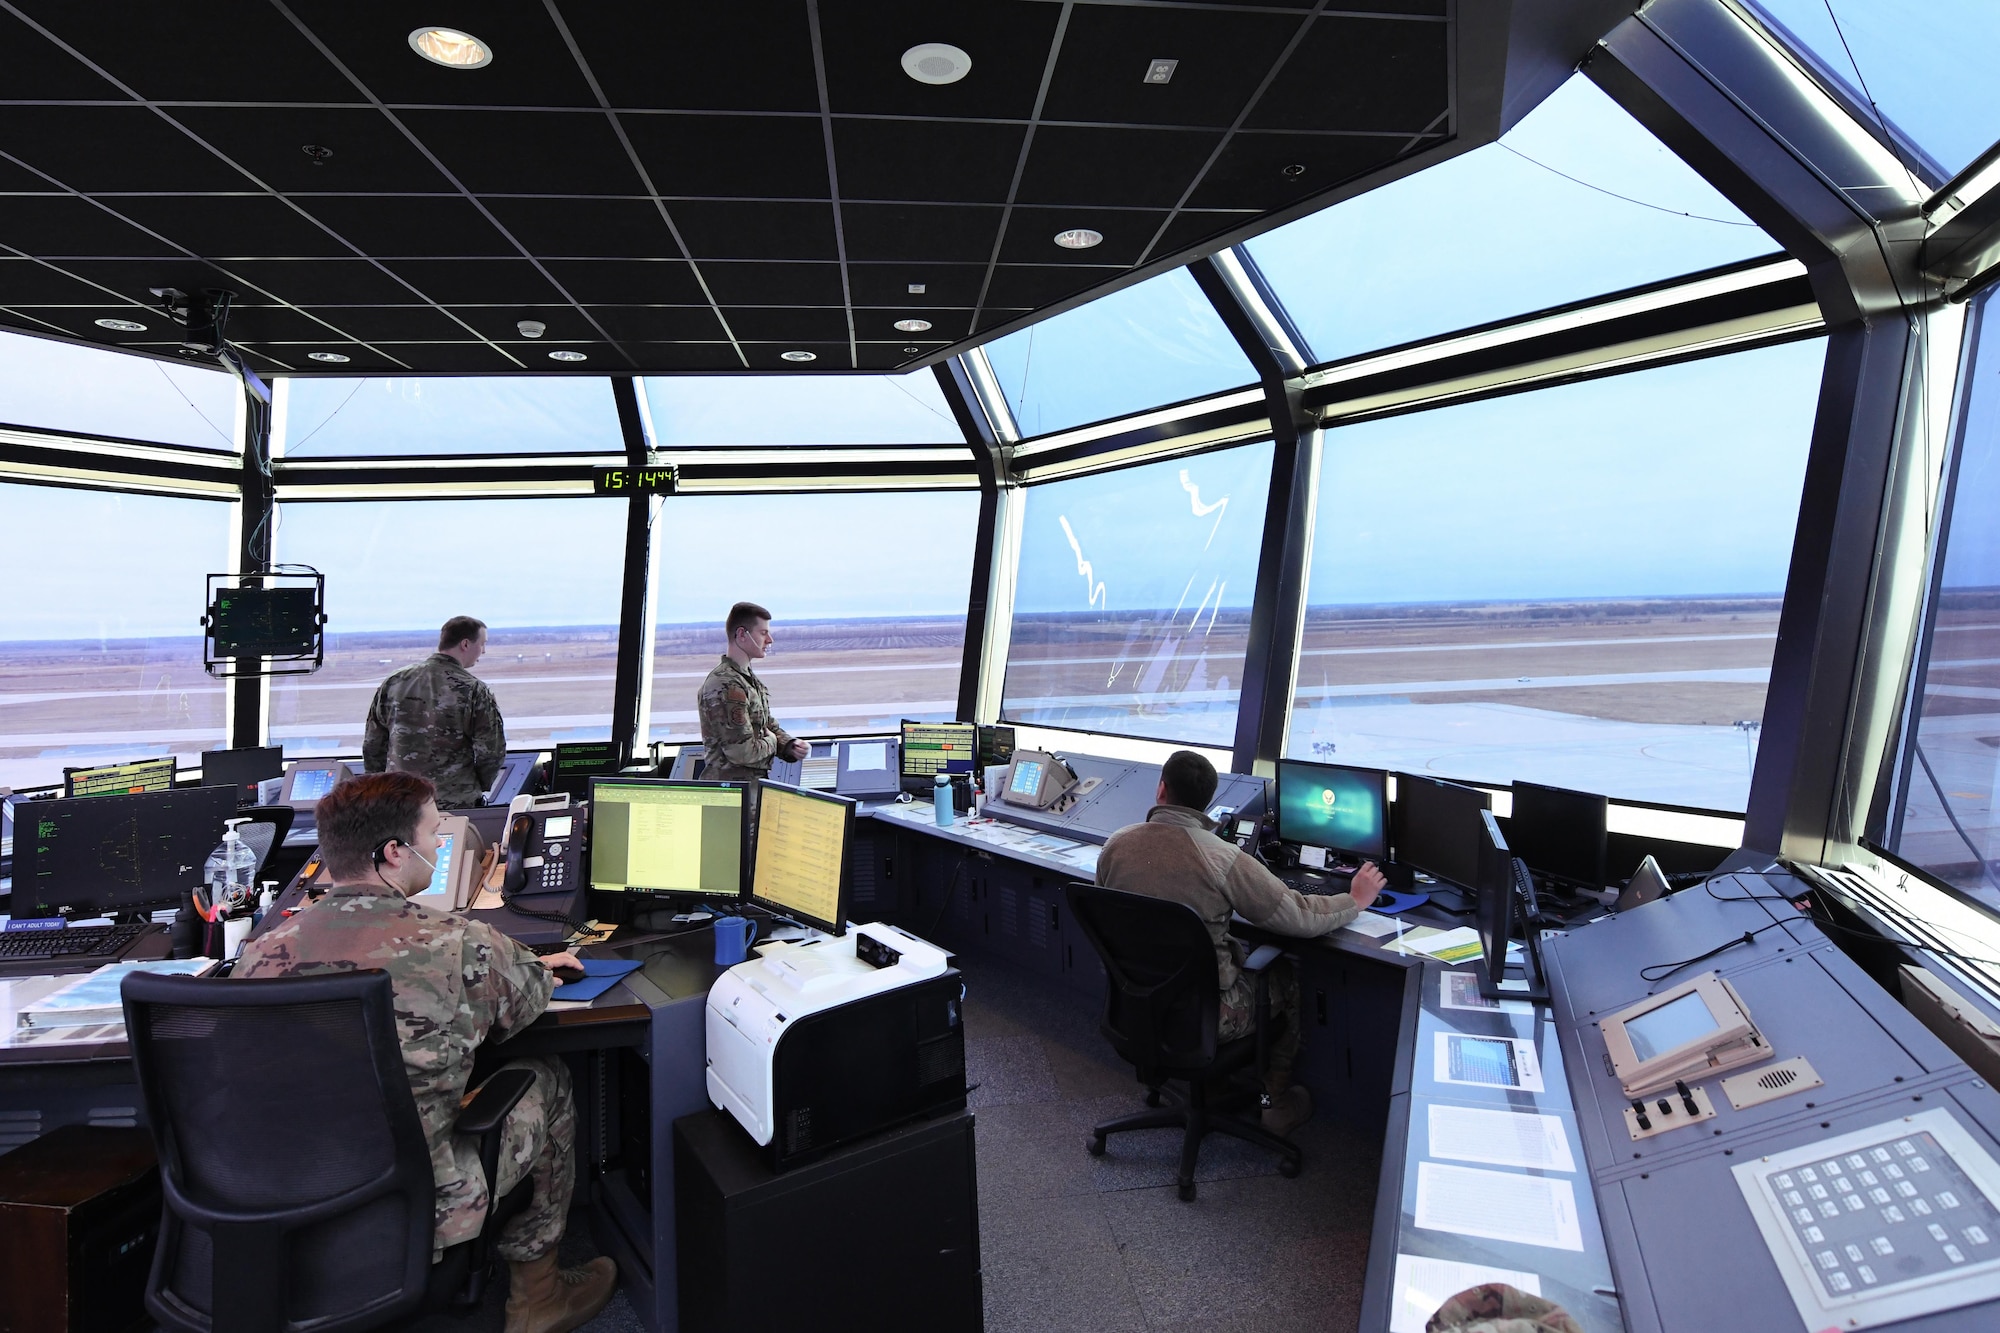 Four airman sit inside a air traffic control tower looking out.